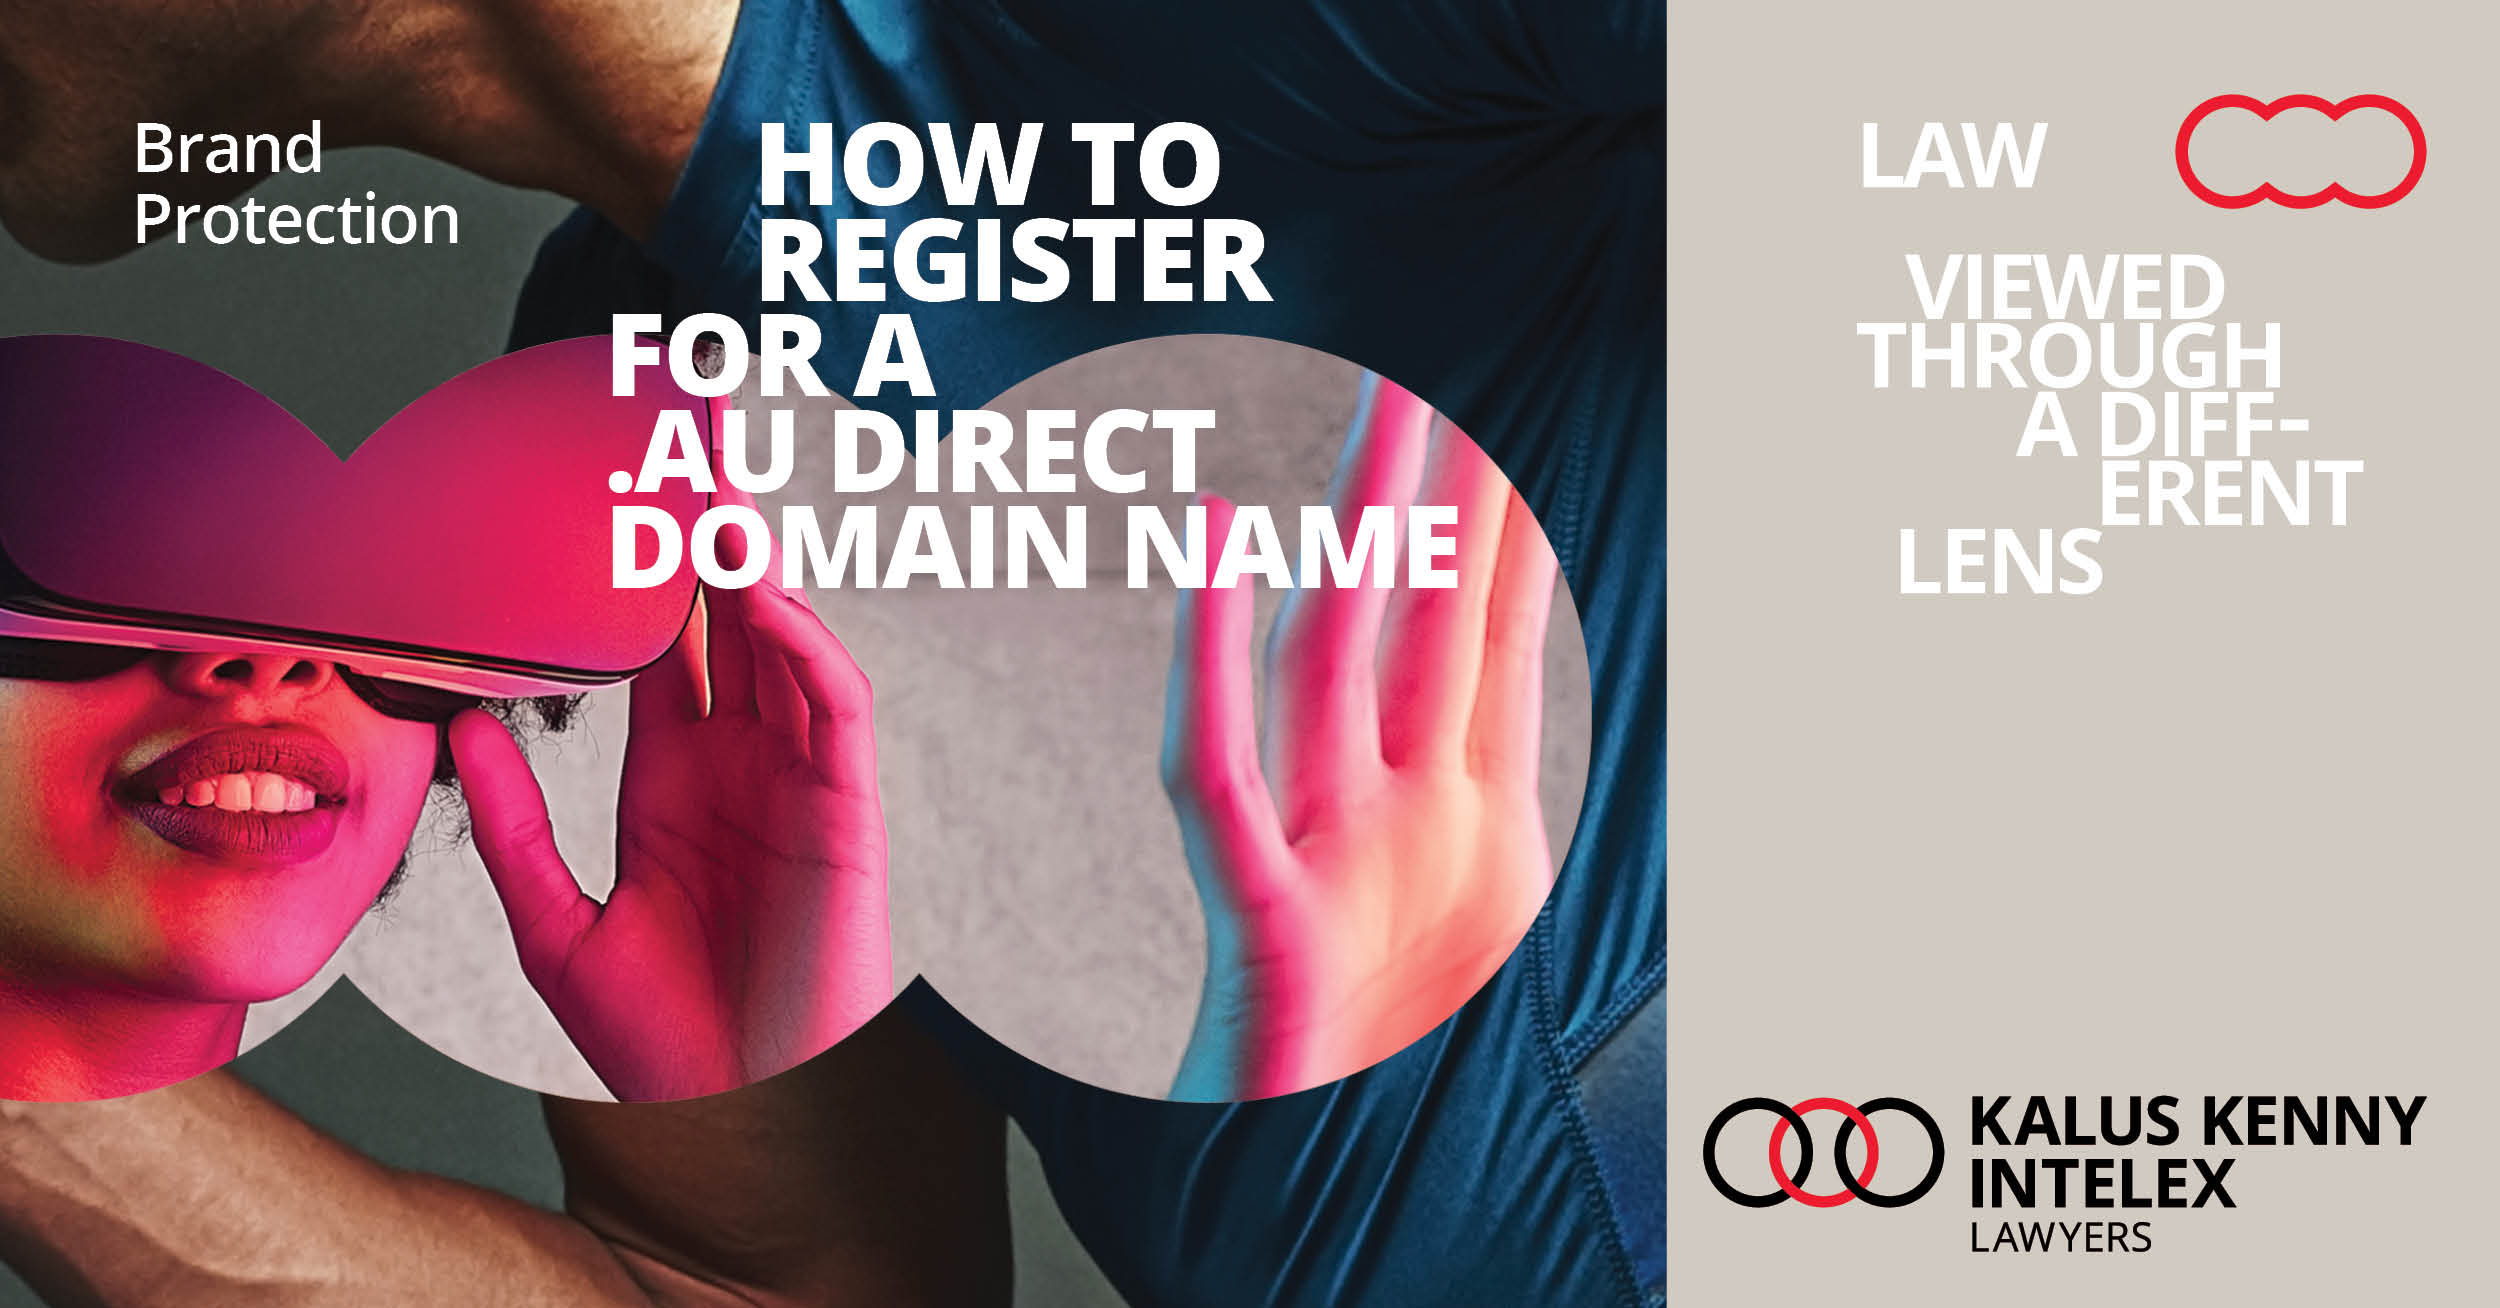 Can I register for a .AU direct domain name?